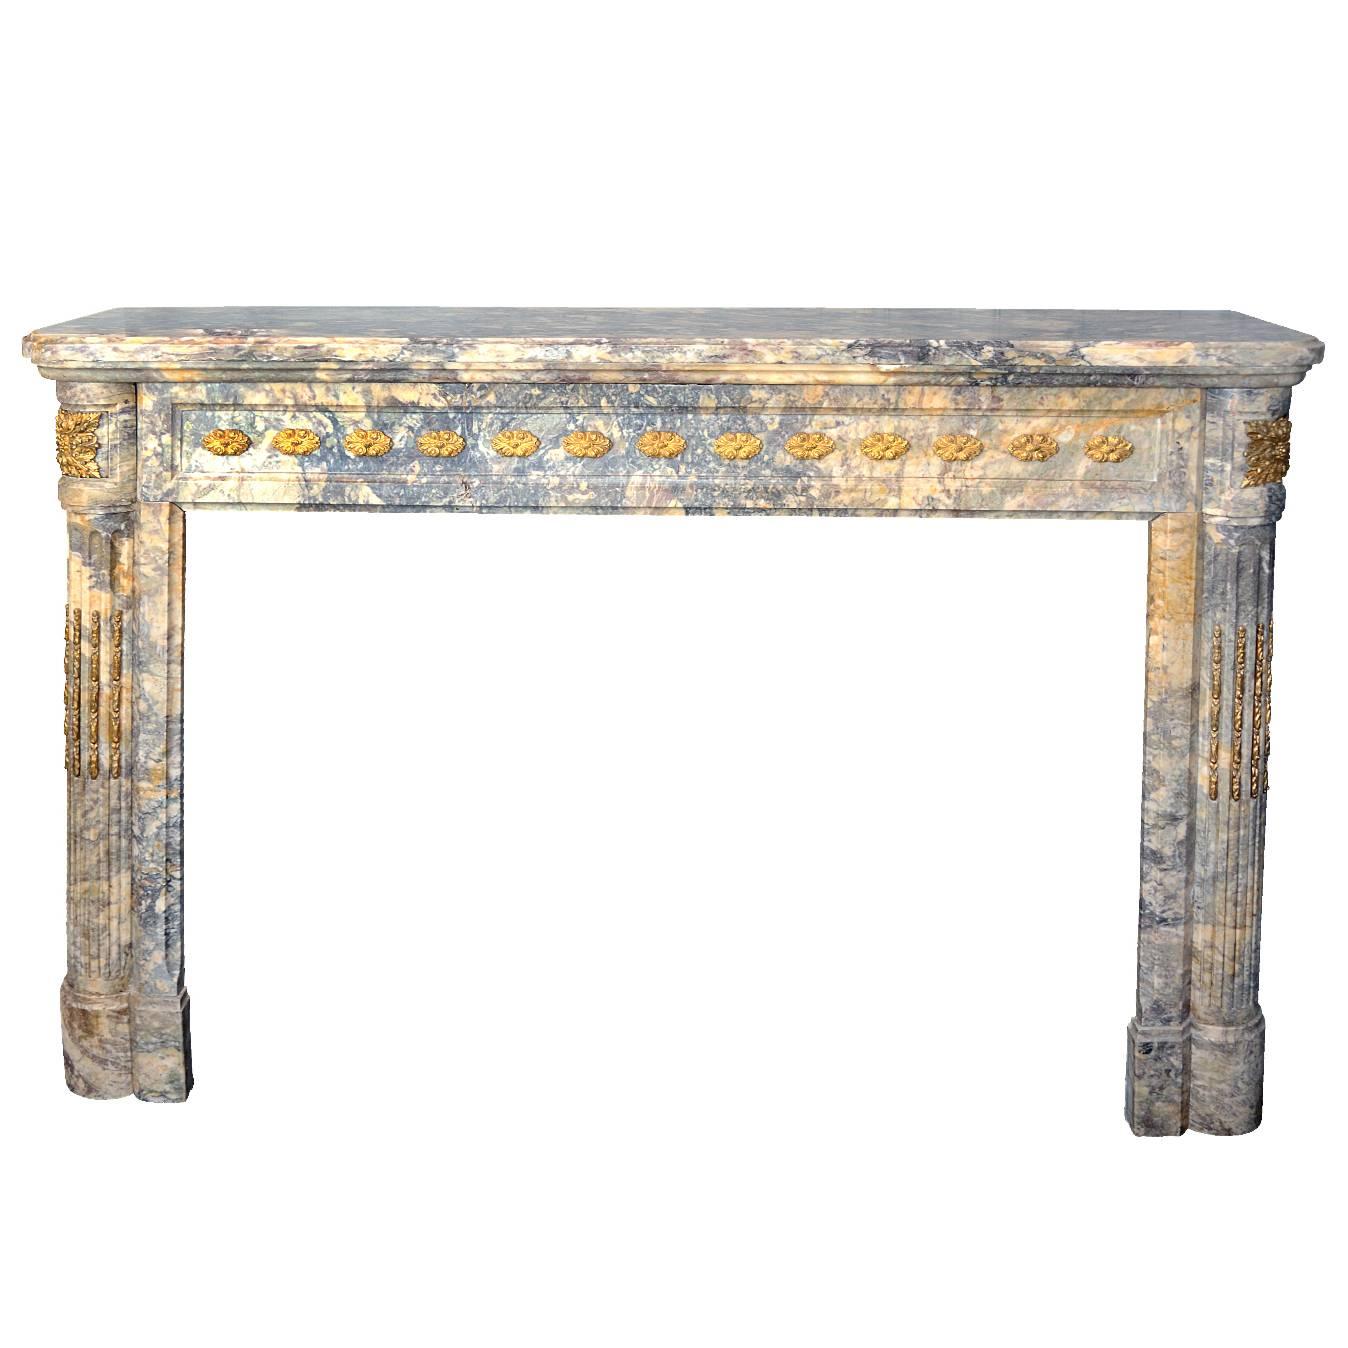 French Louis XVI Neoclassical Marble Fireplace, circa 1780 For Sale